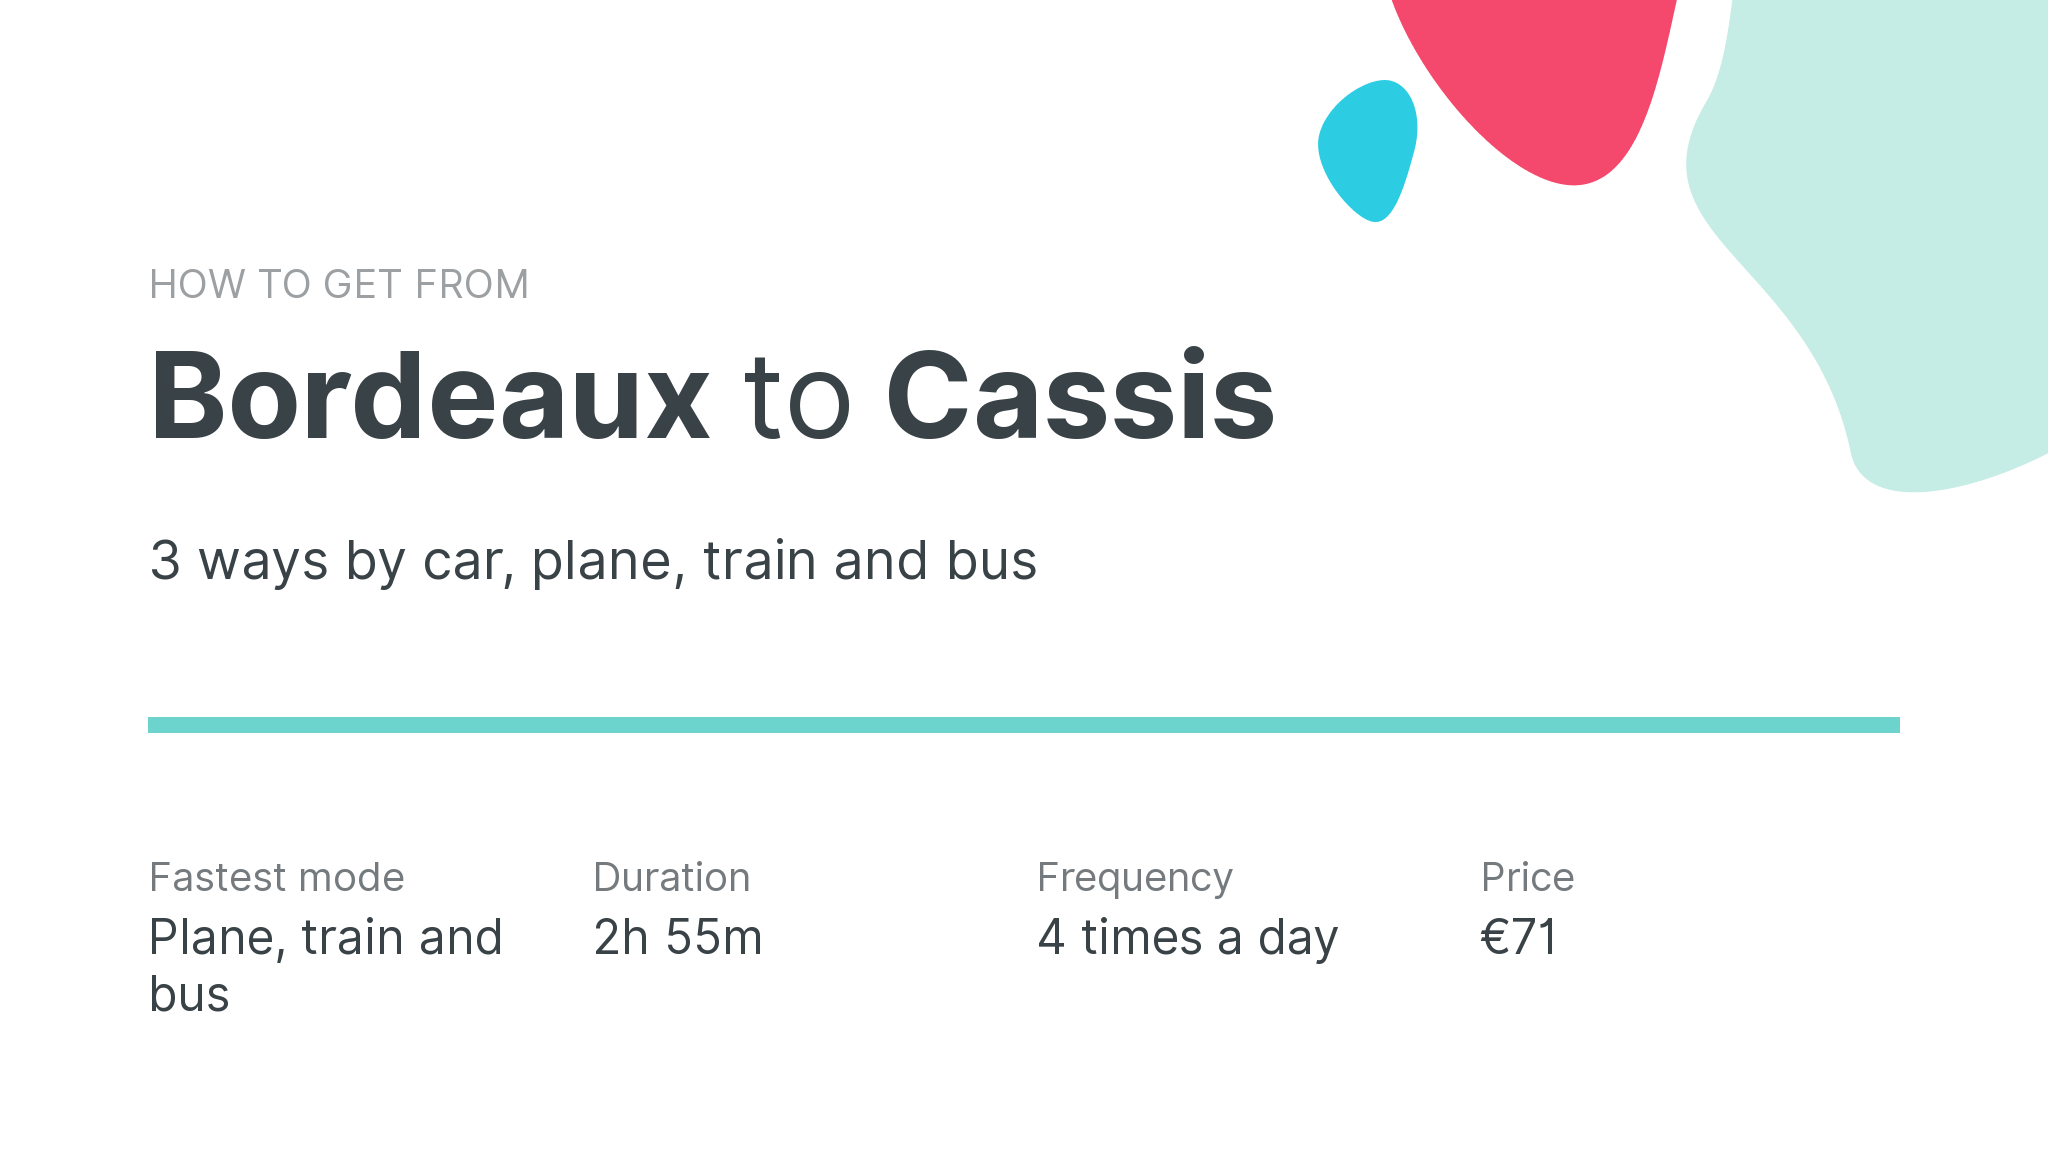 How do I get from Bordeaux to Cassis